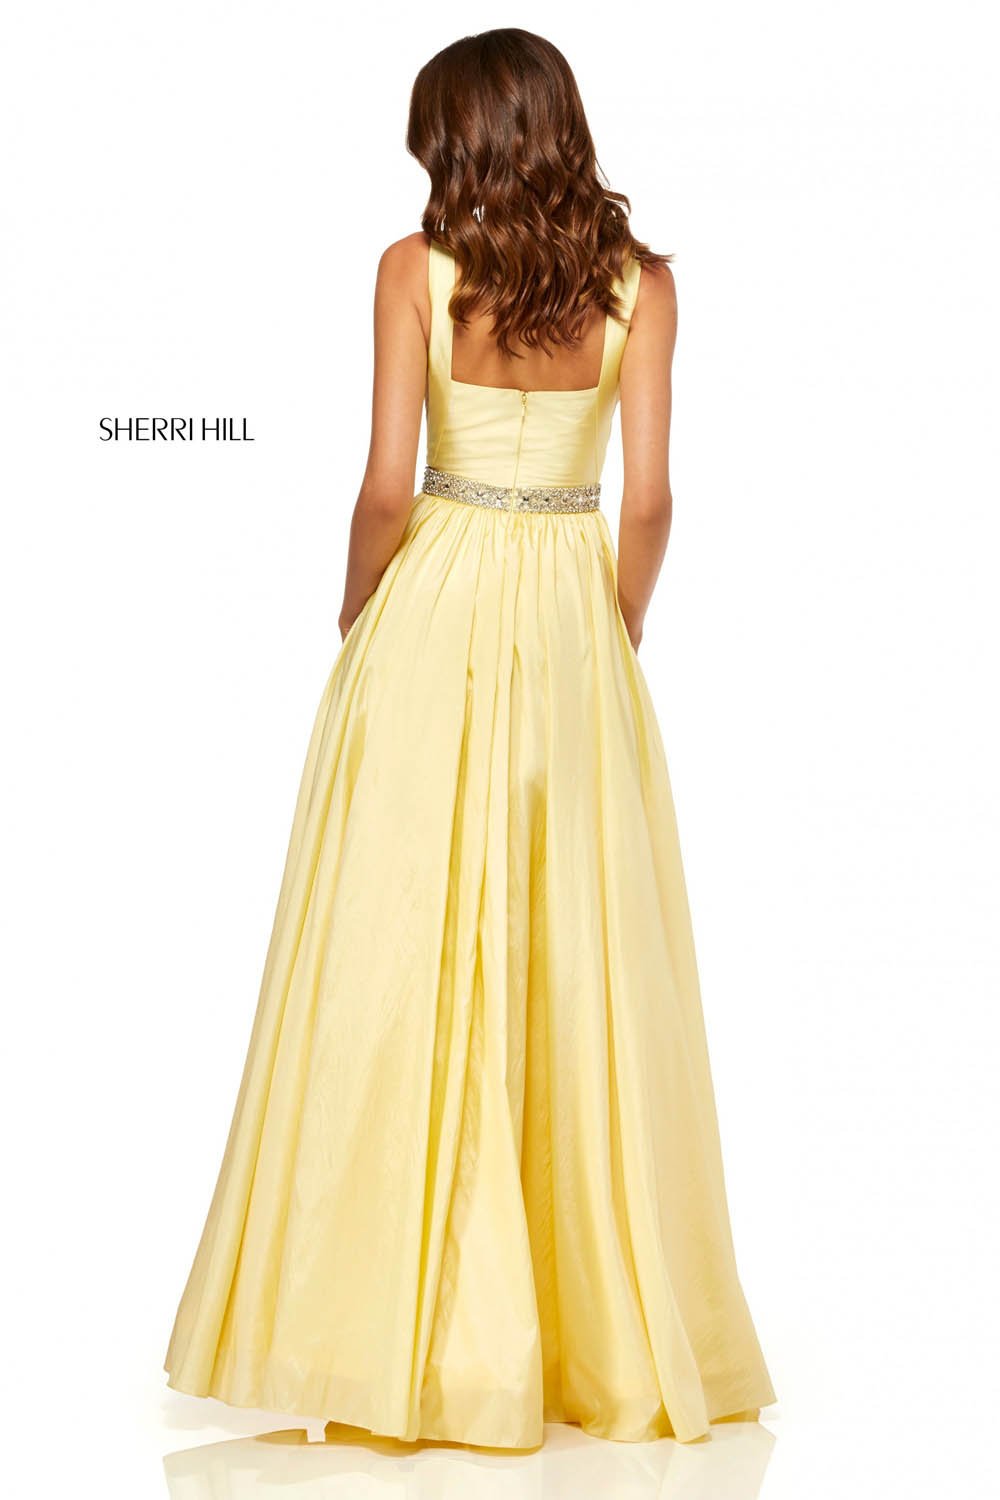 Sherri Hill 52414 dress images in these colors: Ivory, Light Blue, Lilac, Yellow, Pink.